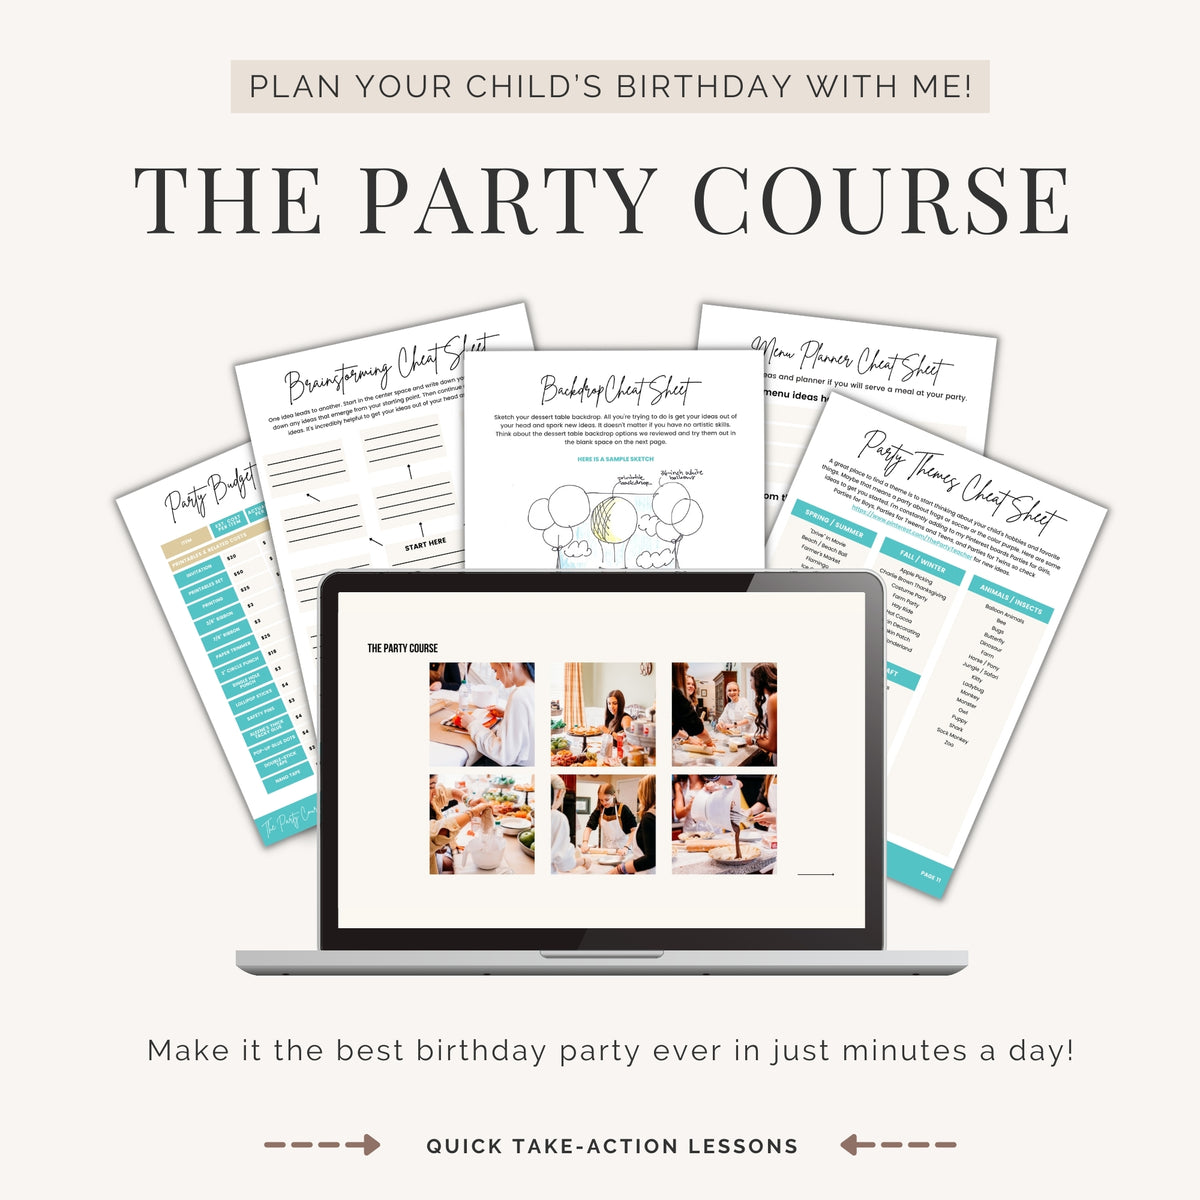 Plan your child's birthday with me inside The Party Course